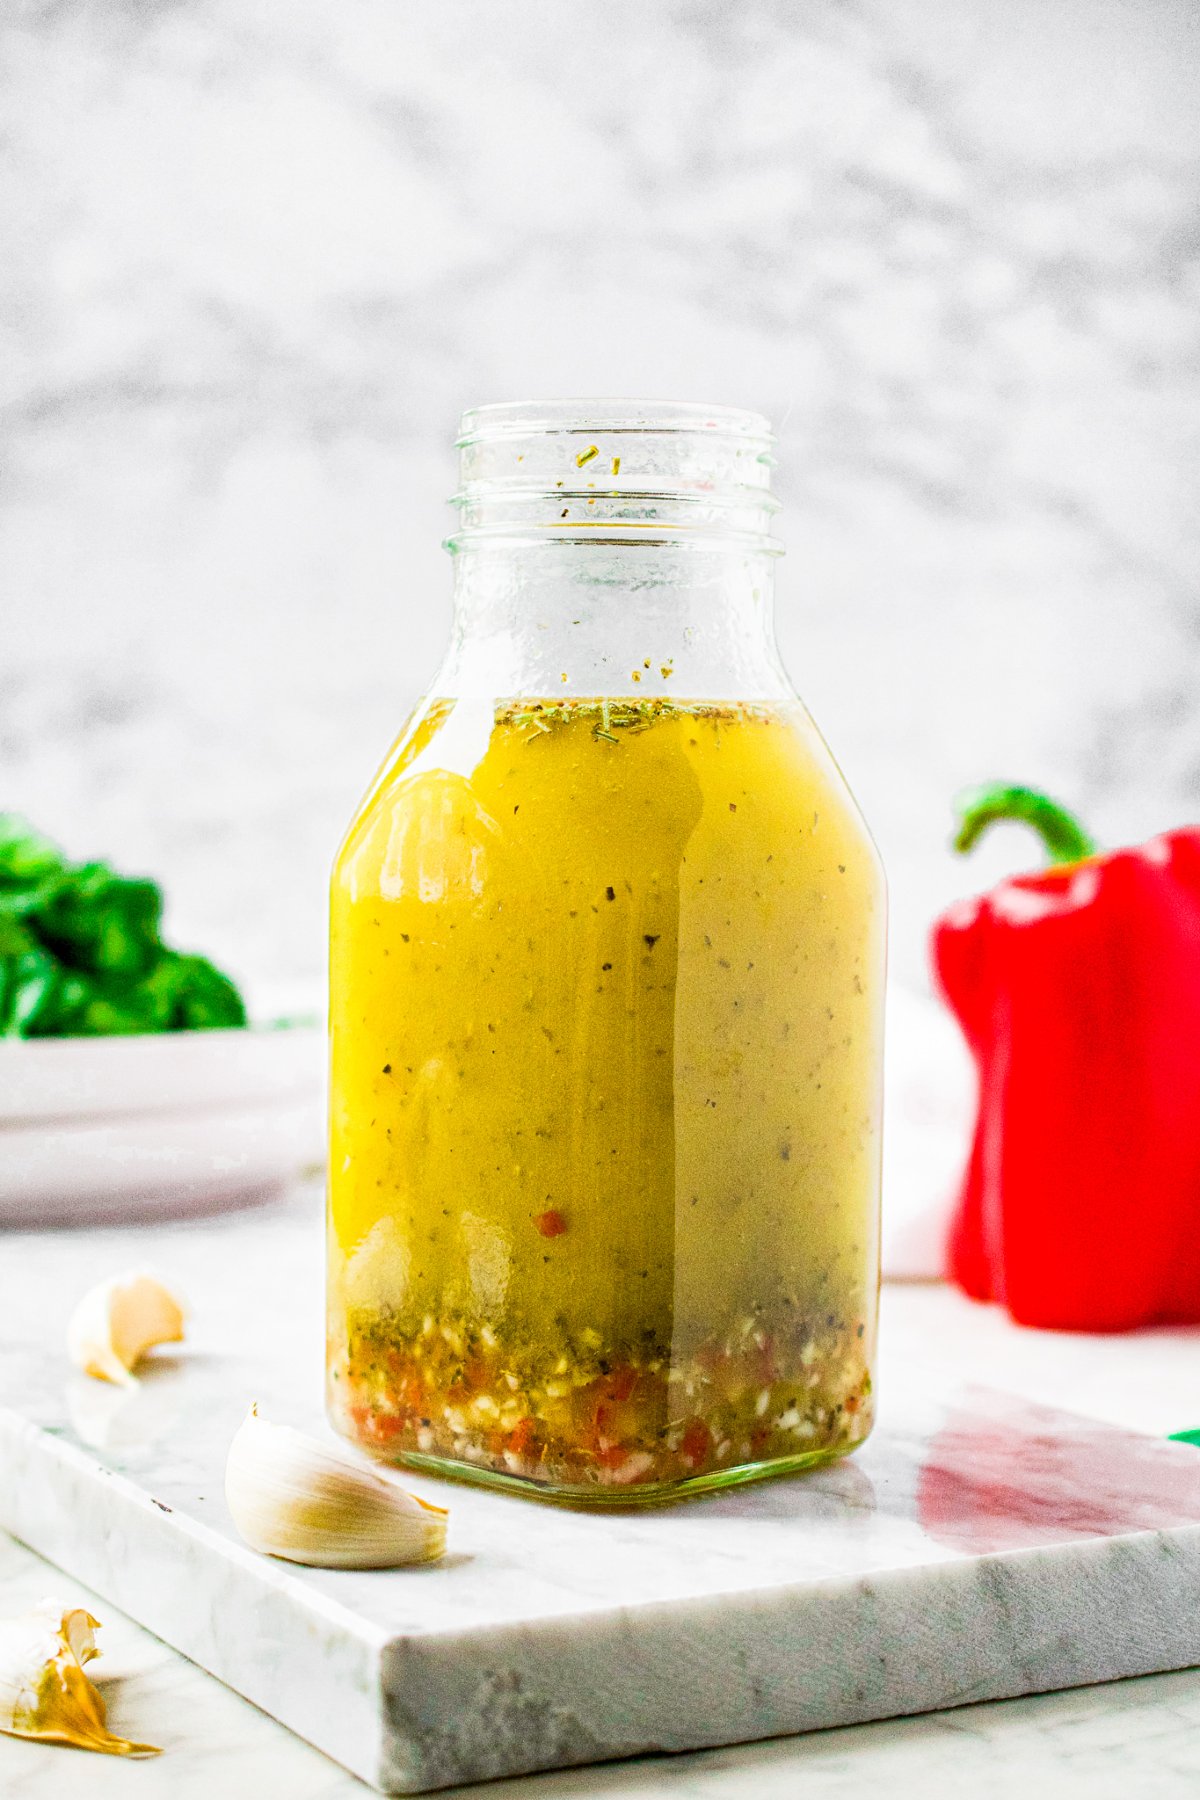 Head-on shot of a bottle filled with homemade Italian salad dressing. There are garlic cloves around the bottle and a standing red bell pepper in the background.